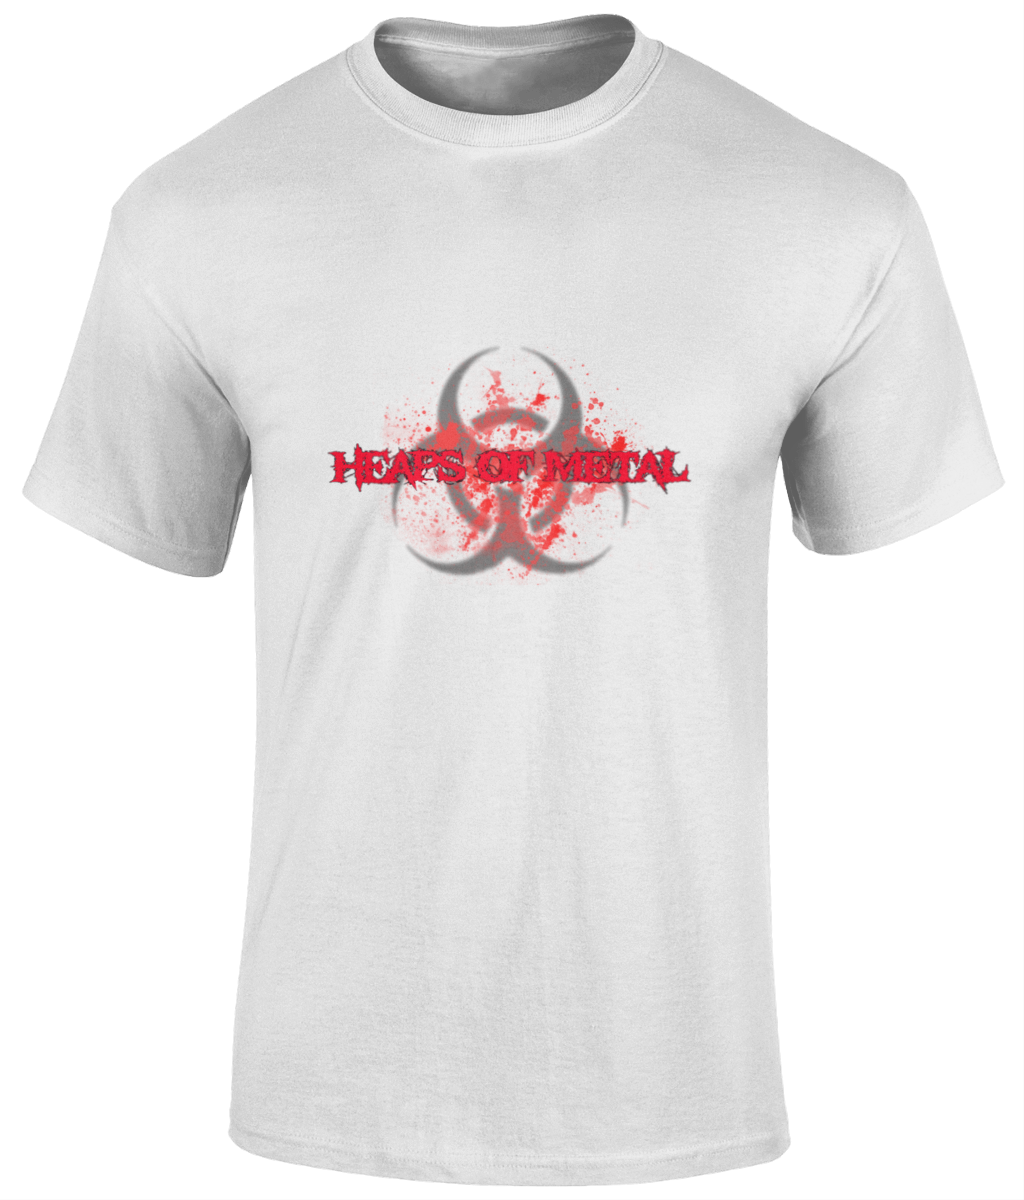 POISON VALLEY CLOTHING "HEAPS OF METAL BIOHAZARD RED" unisex t shirt  Material: 100% cotton.*  Seamless twin needle collar. Taped neck and shoulders. Tubular body. Twin needle sleeves and hem. Available in Black or white Sizes small to 5XL